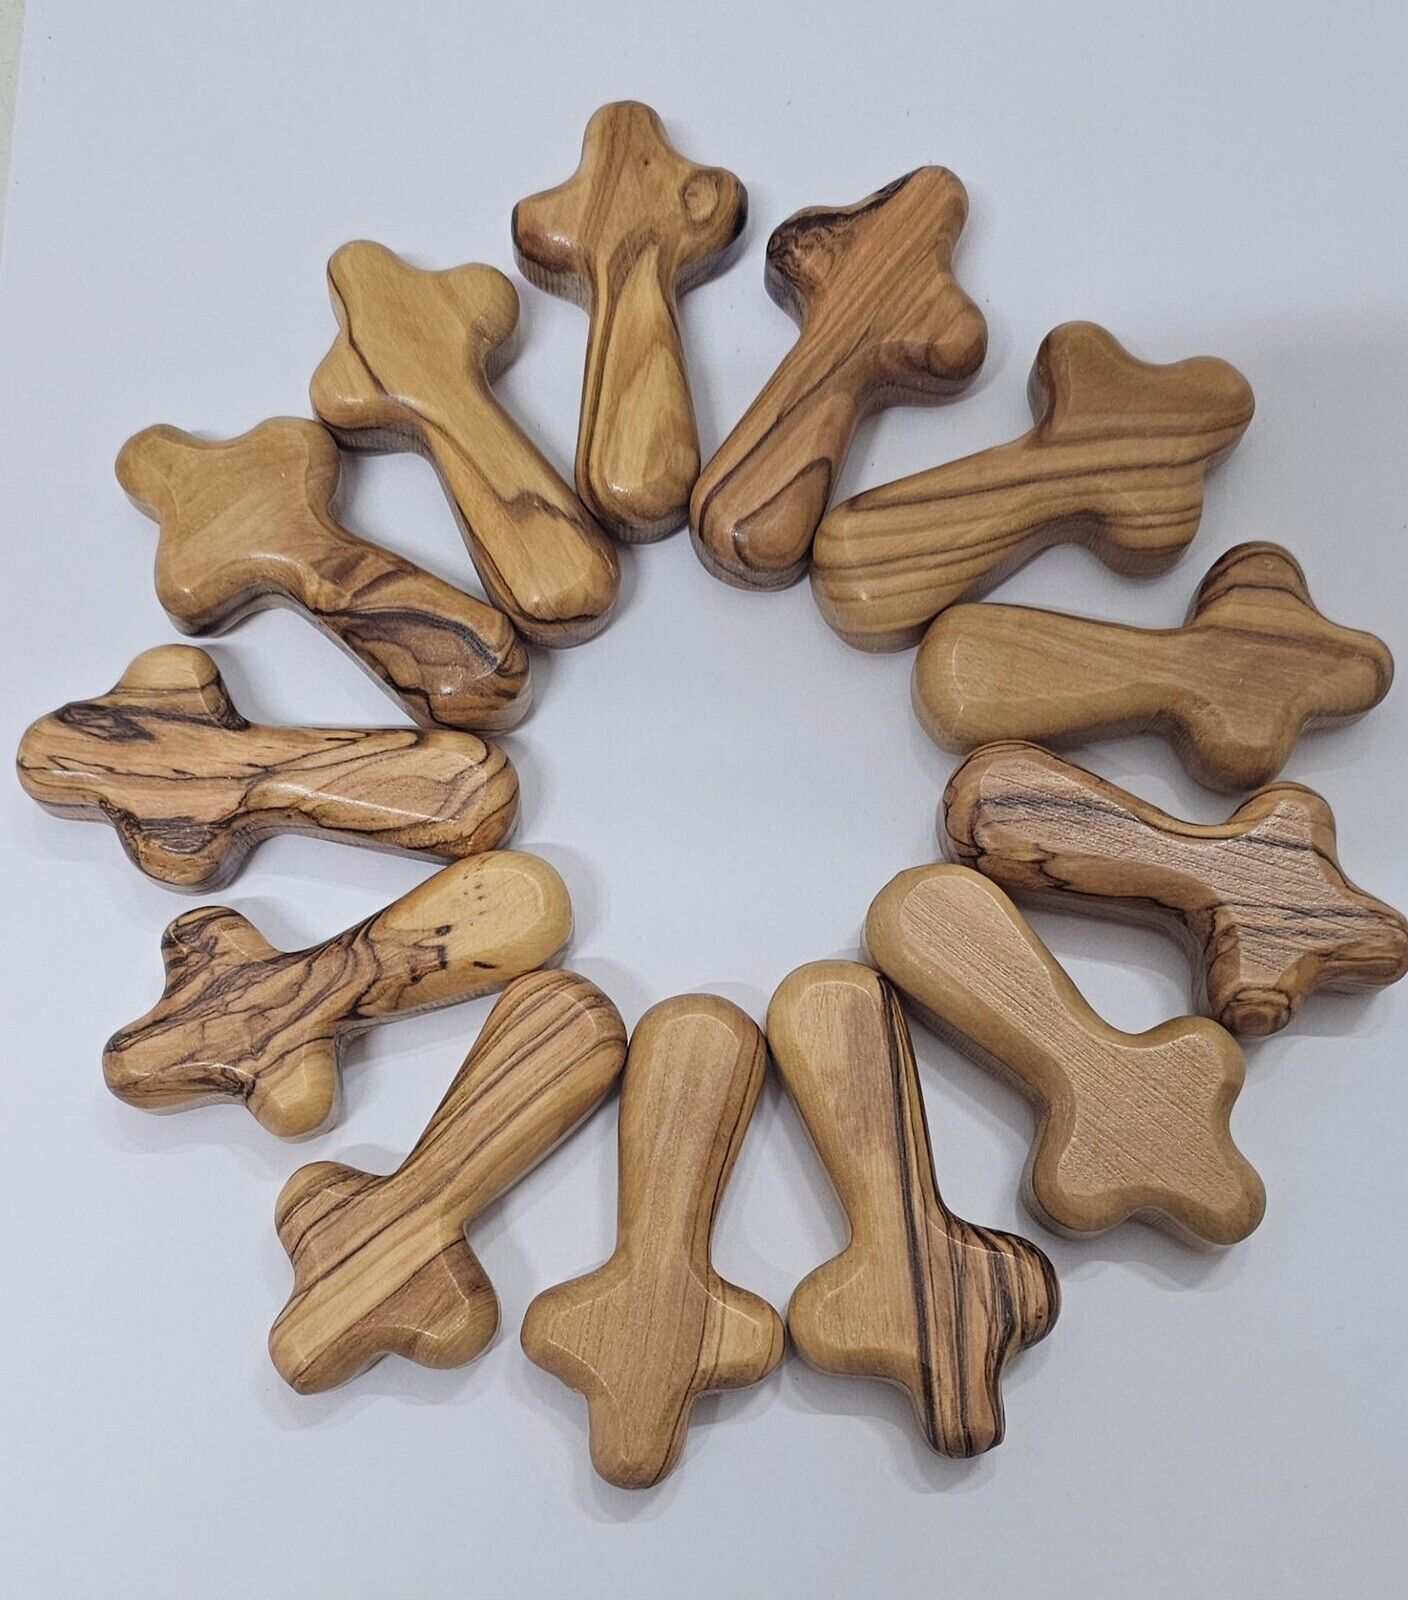 100 pieces of olive wood comfort cross(2.5 Inch)